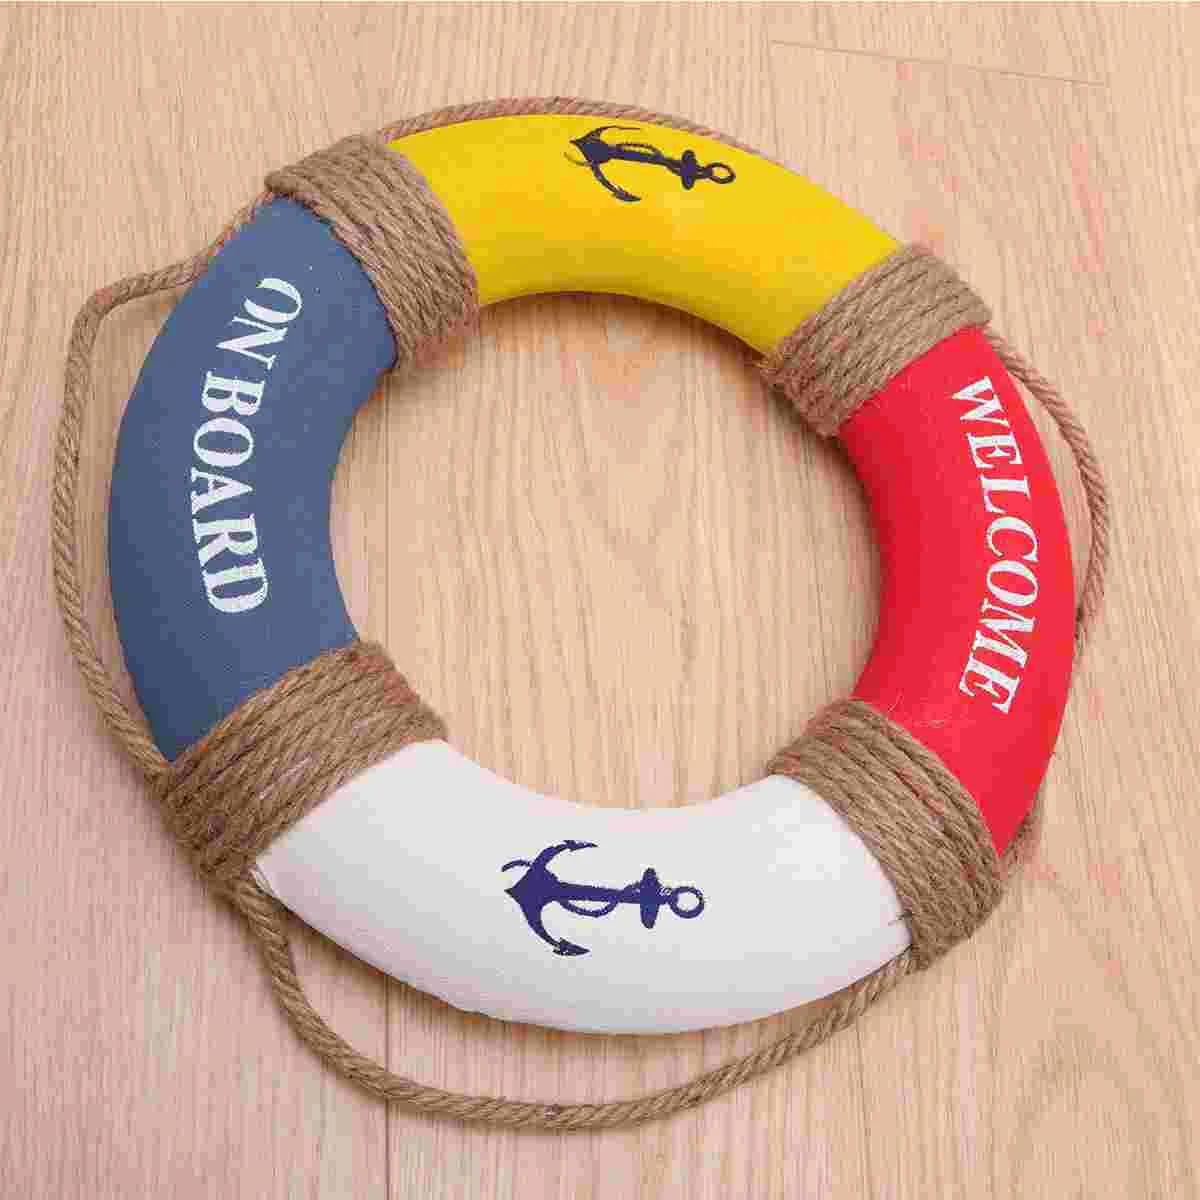 

Life Ring Wall Nautical Hanging Decor Welcome Lifebuoy Decoration Sign Door Decorative Beach Home Ornament Buoy Mediterranean